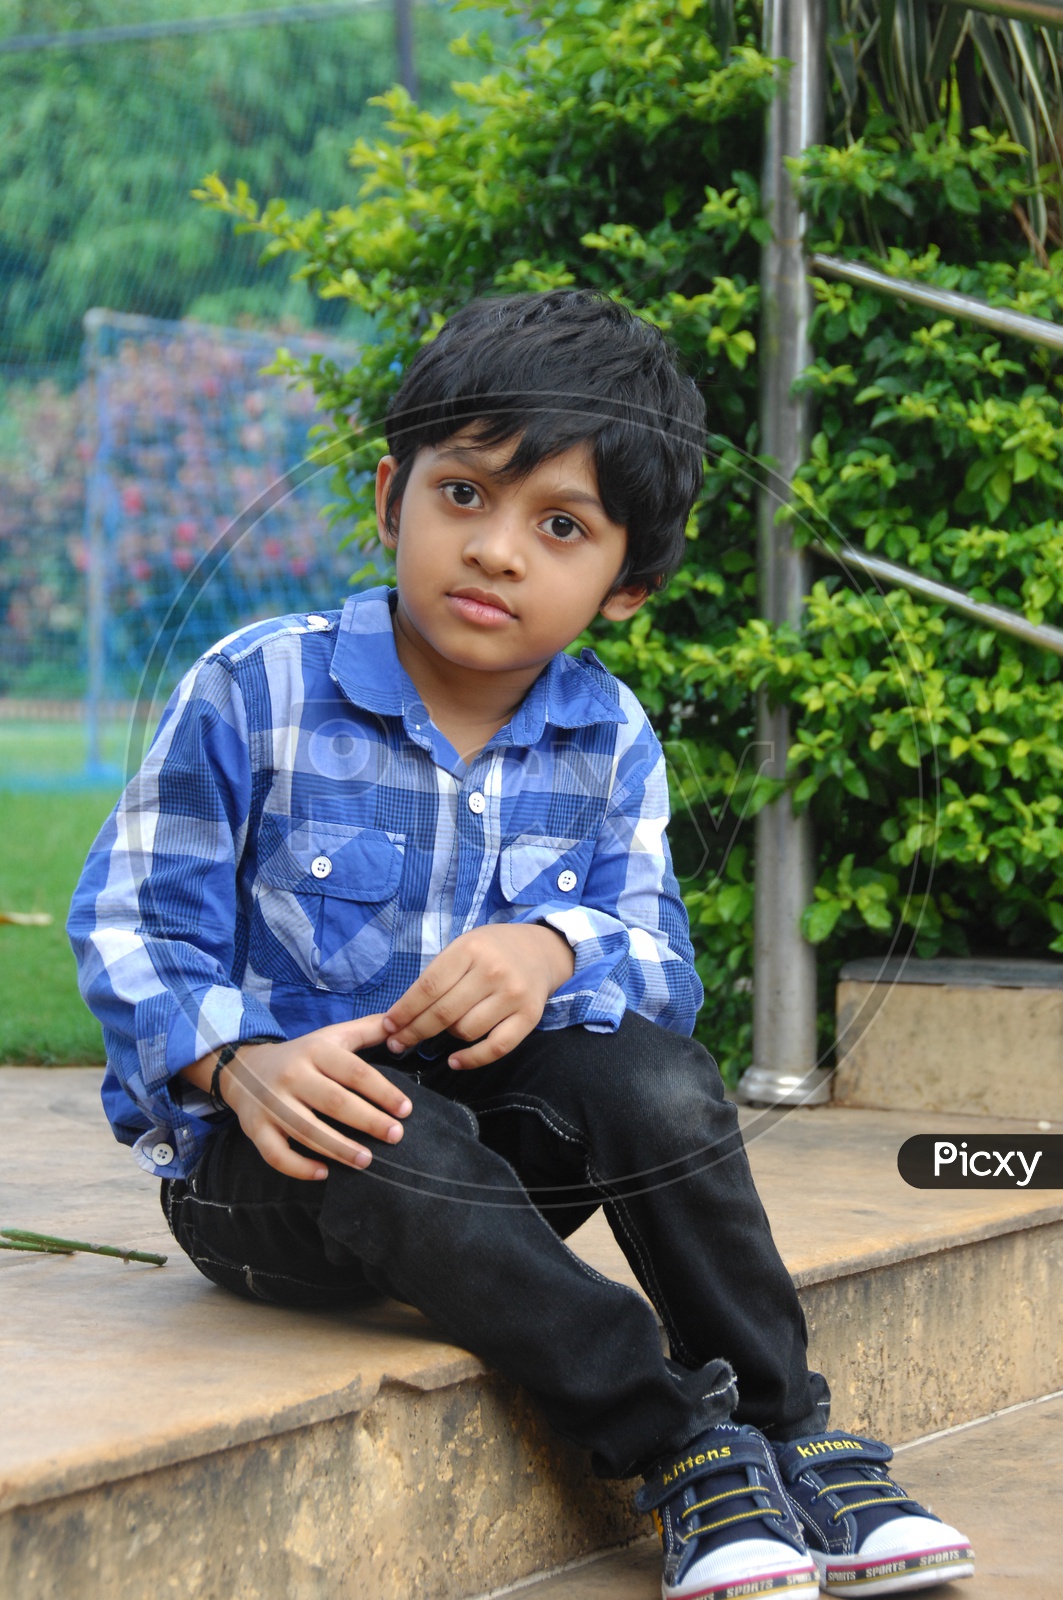 Young boy poses and smiles for camera in photoshoot Stock Photo by  ©elfachero3@gmail.com 294043986